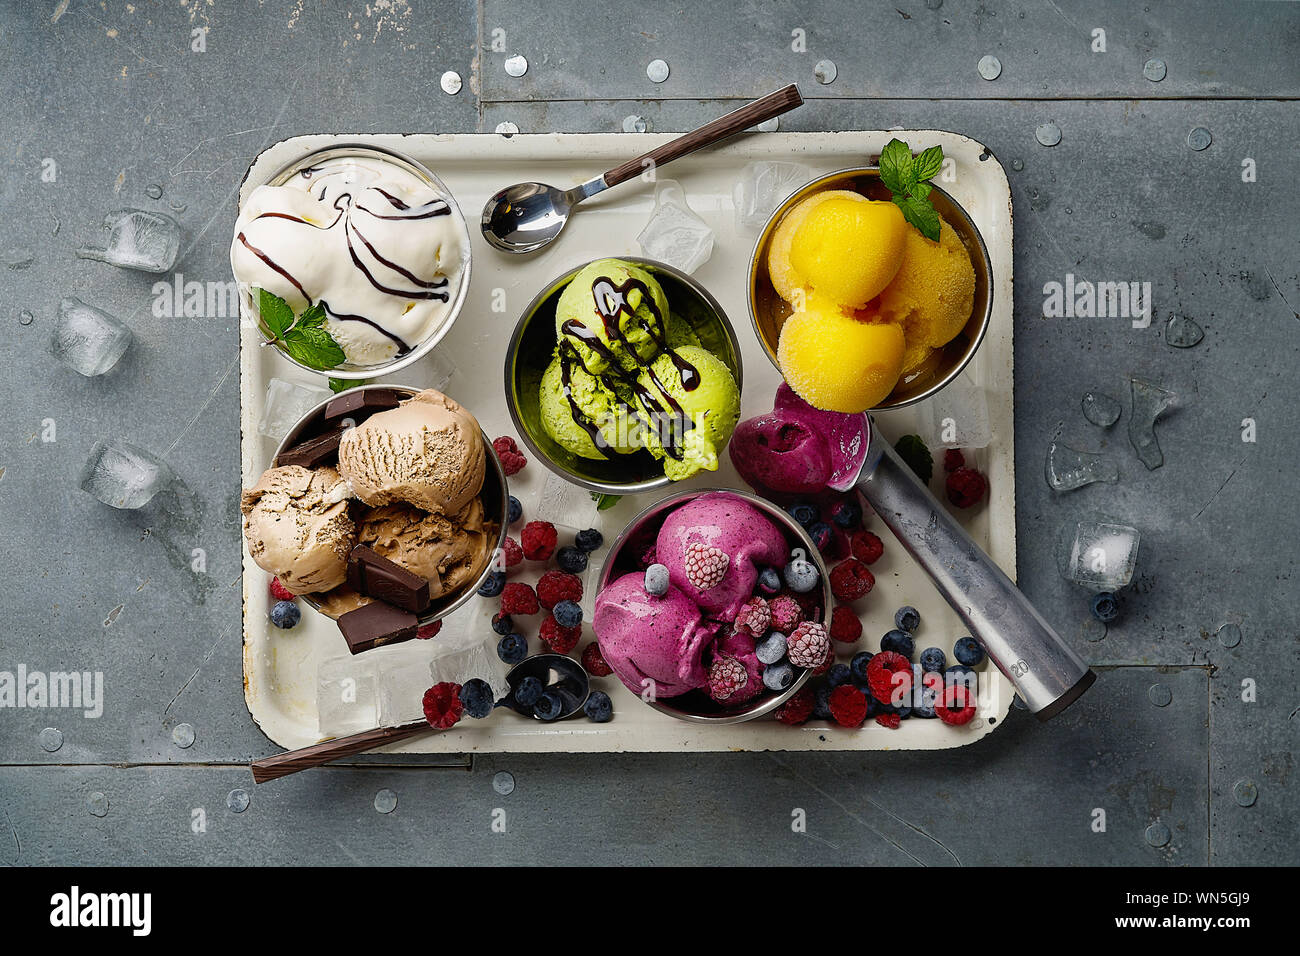 Assorted flavors and colors of gourmet Italian ice cream served on steel table. Mango, chocolate, green matcha ice cream Stock Photo